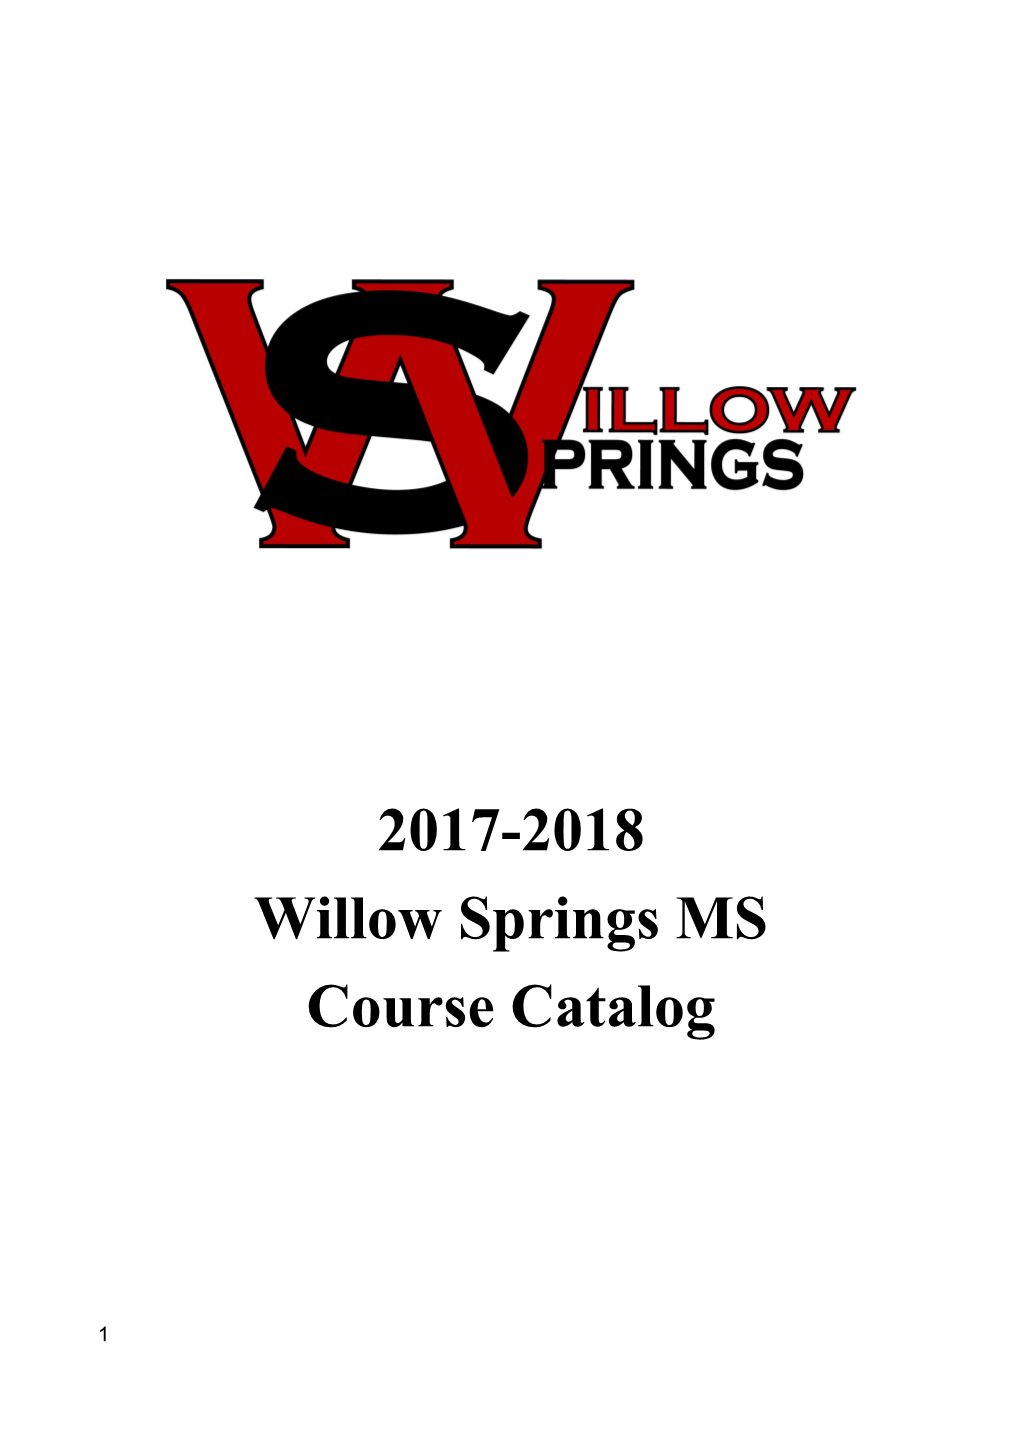 Willow Springs MS